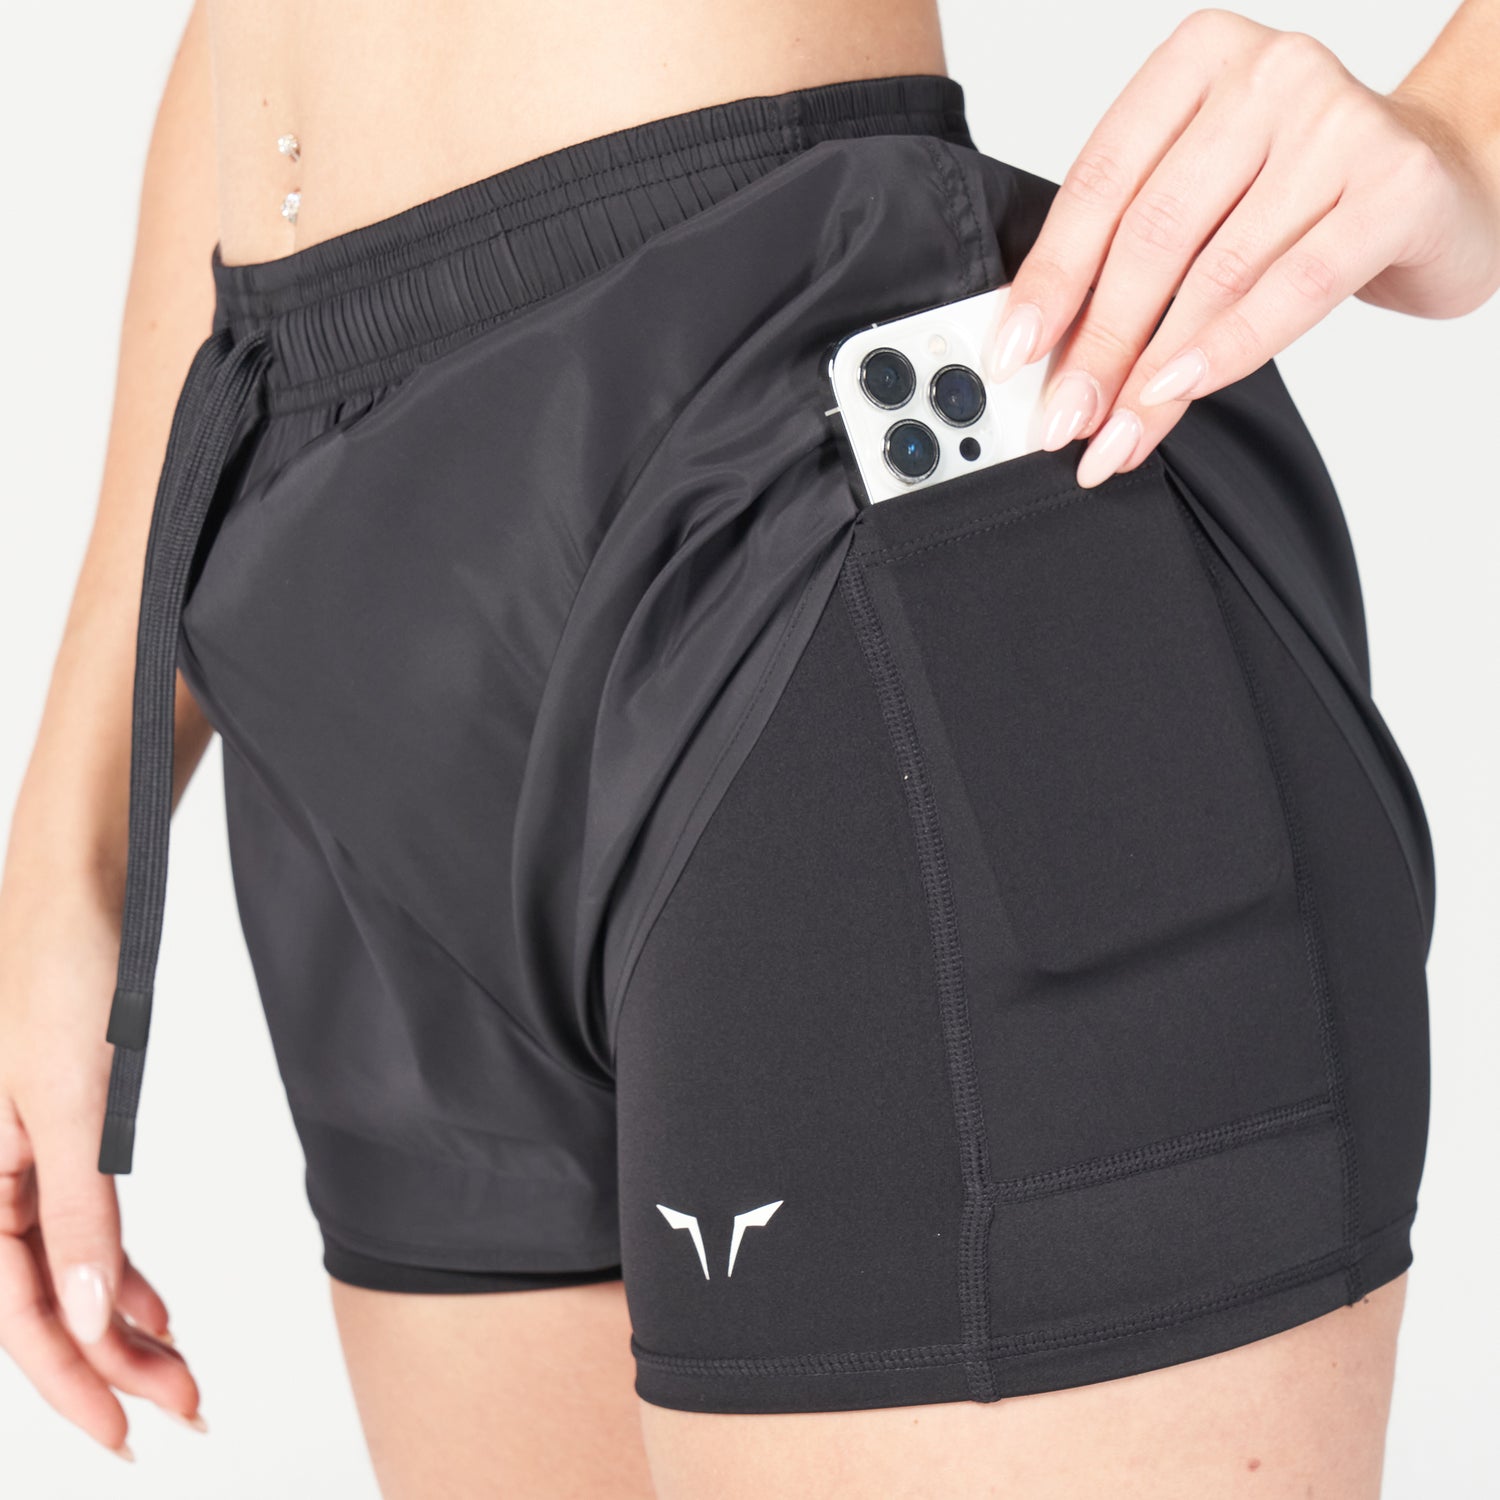 squatwolf-workout-clothes-glaze-2-in-1-shorts-black-gym-shorts-for-women